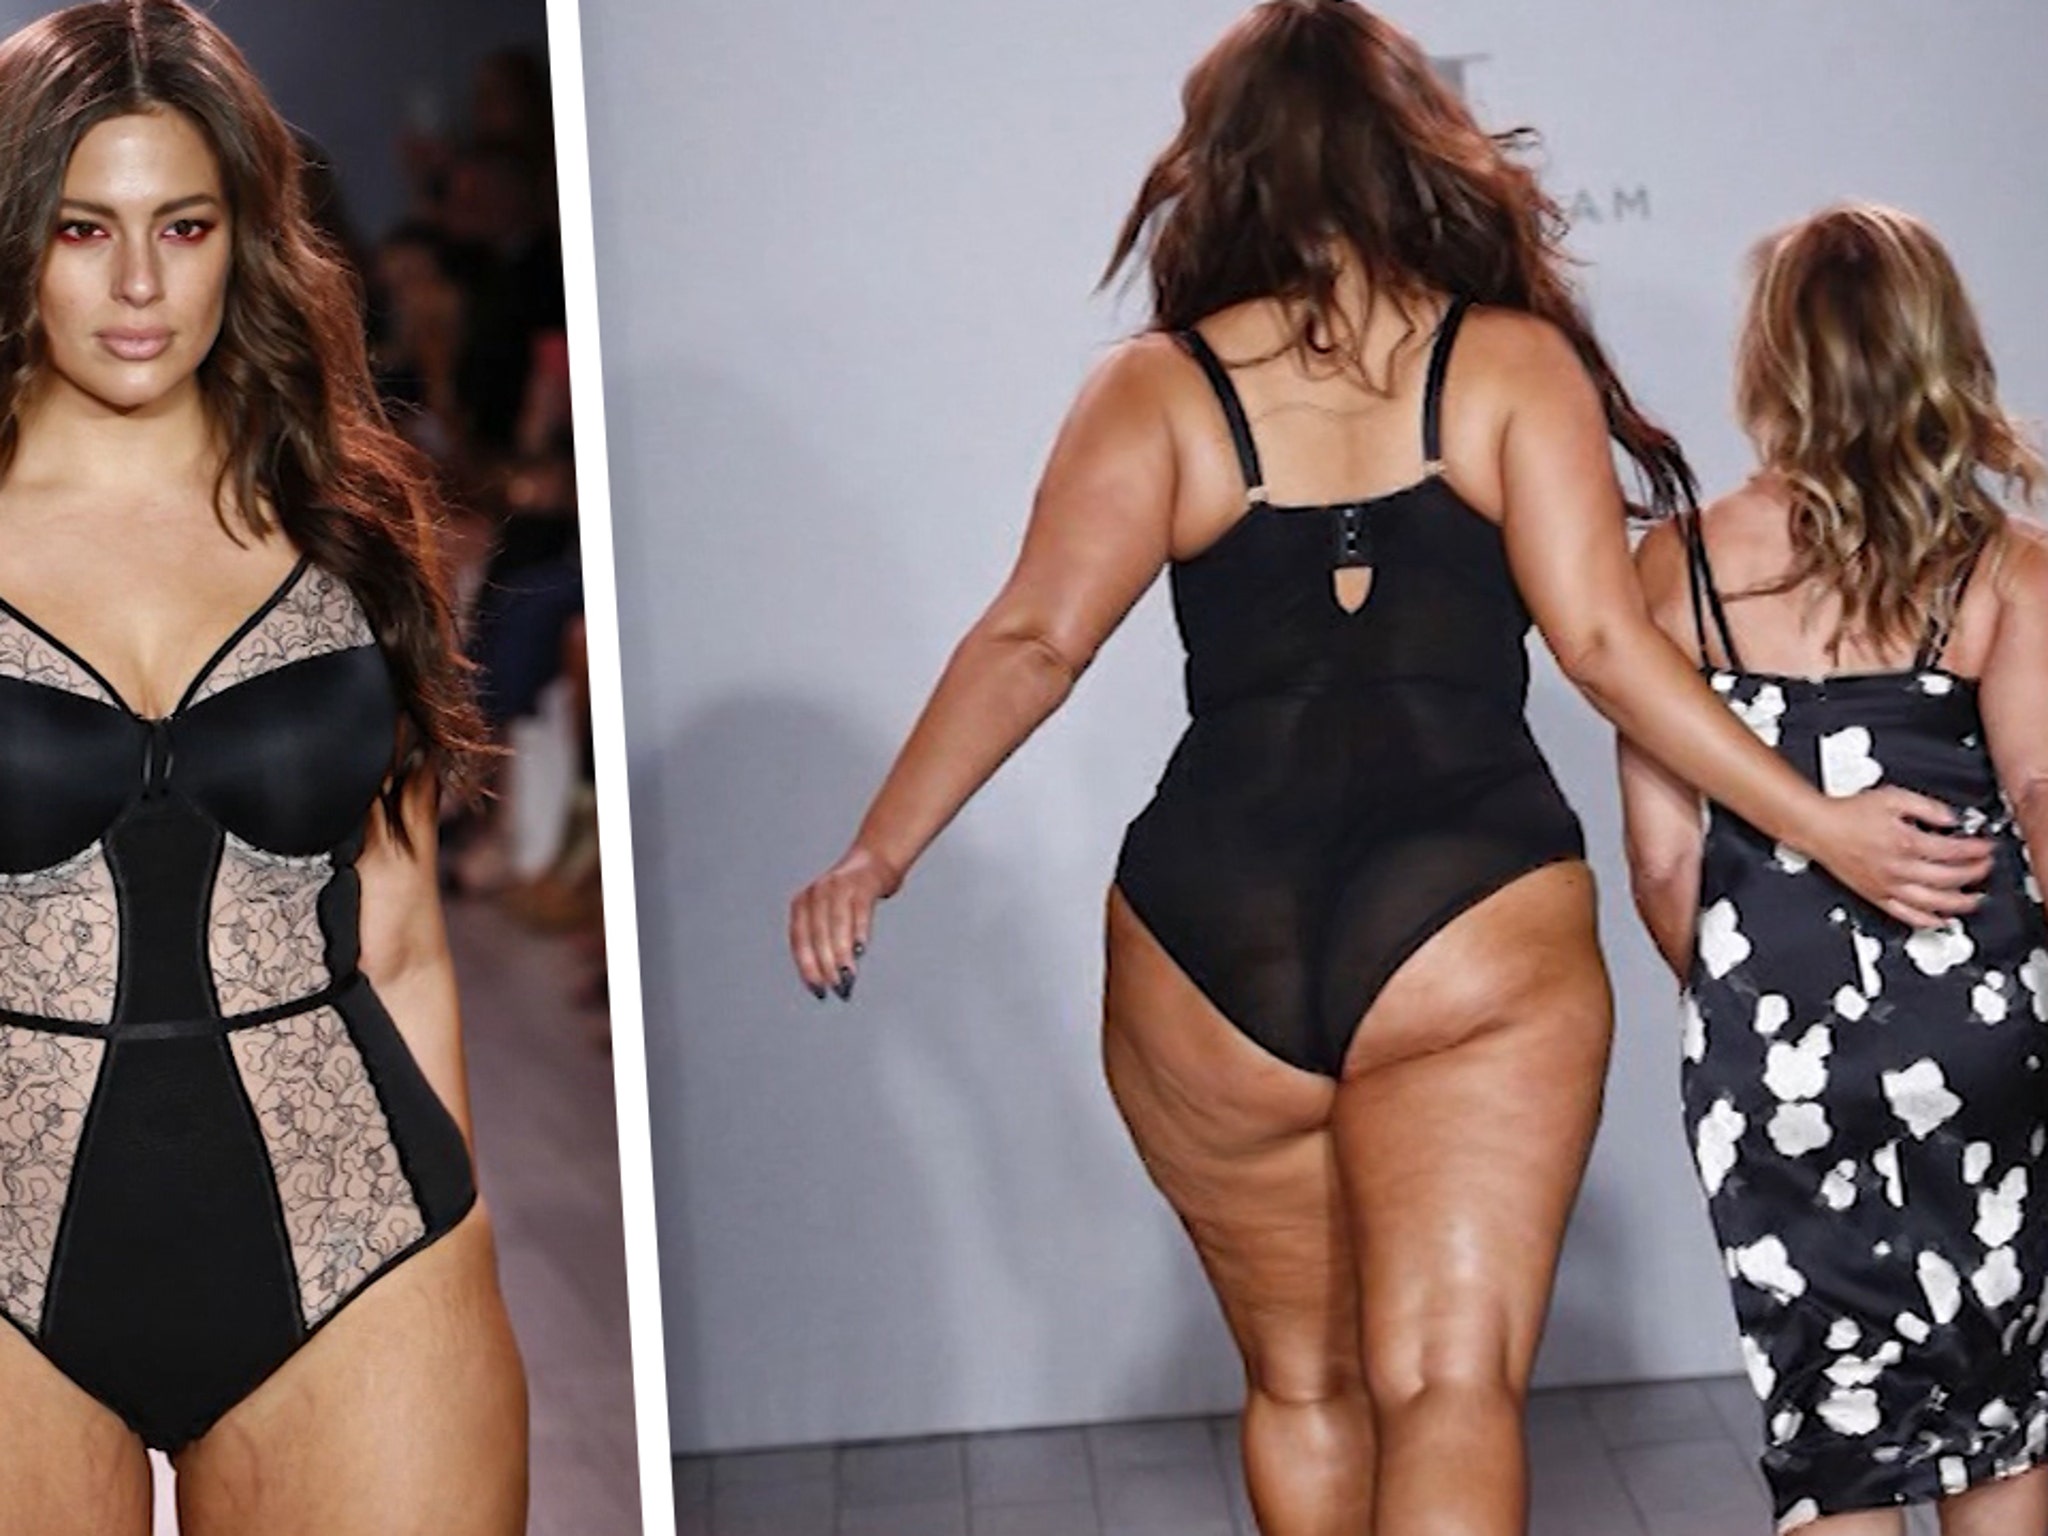 World's Sexiest Woman Ashley Graham shows off legs in black panties in  behind-the-scenes video from fashion show